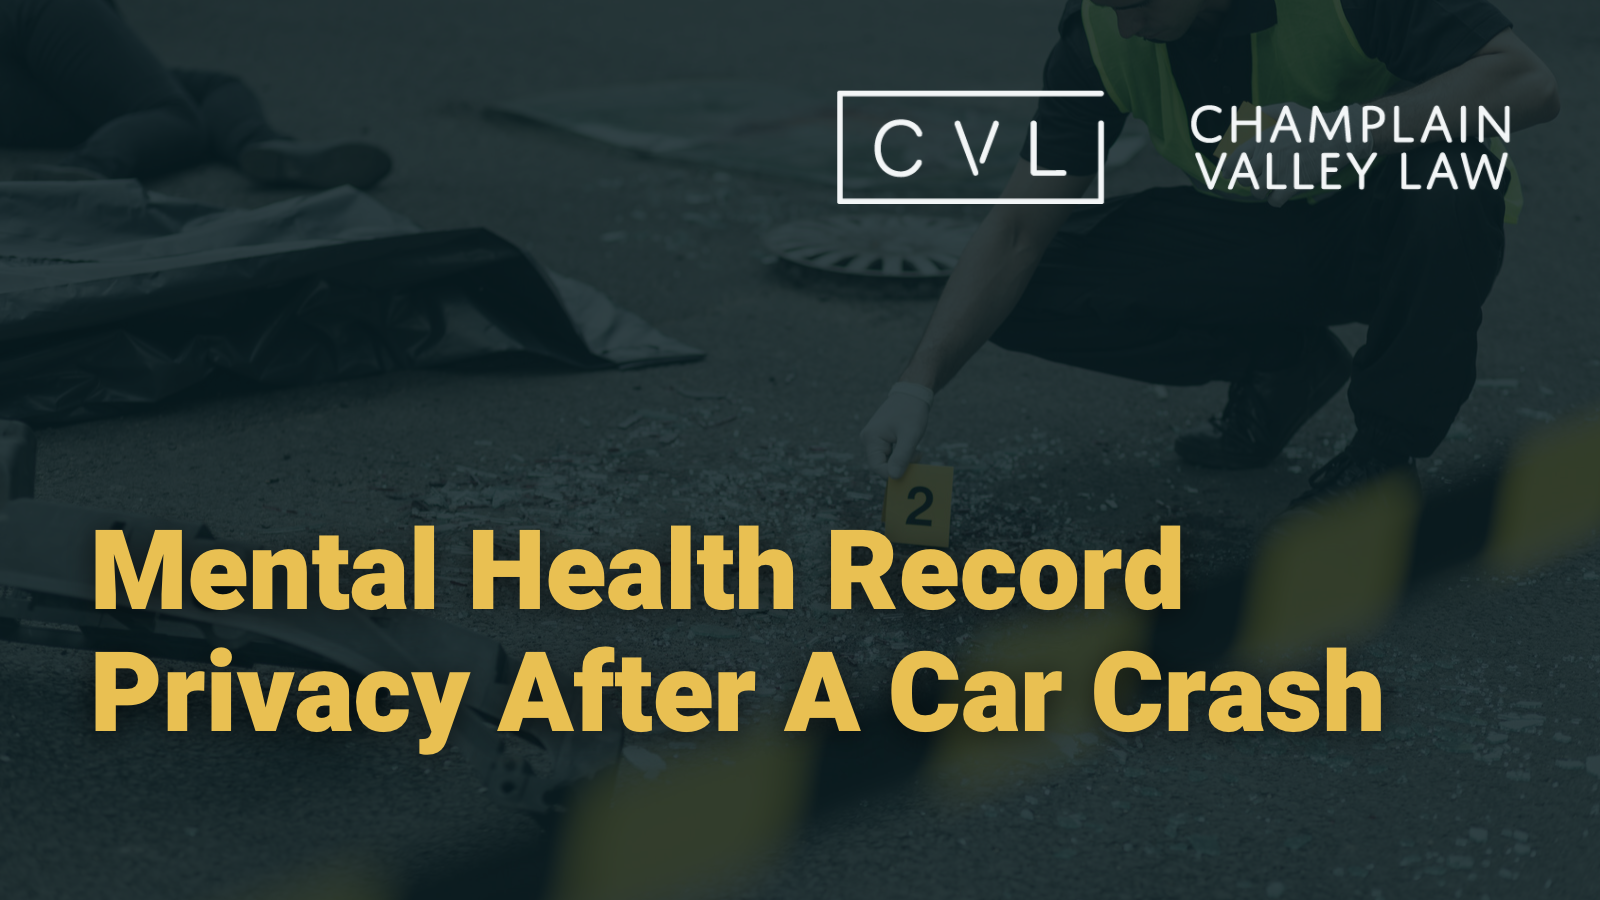 Mental Health Record Privacy After A Car Crash in vermont - Champlain Valley Law - Attorney Drew Palcsik